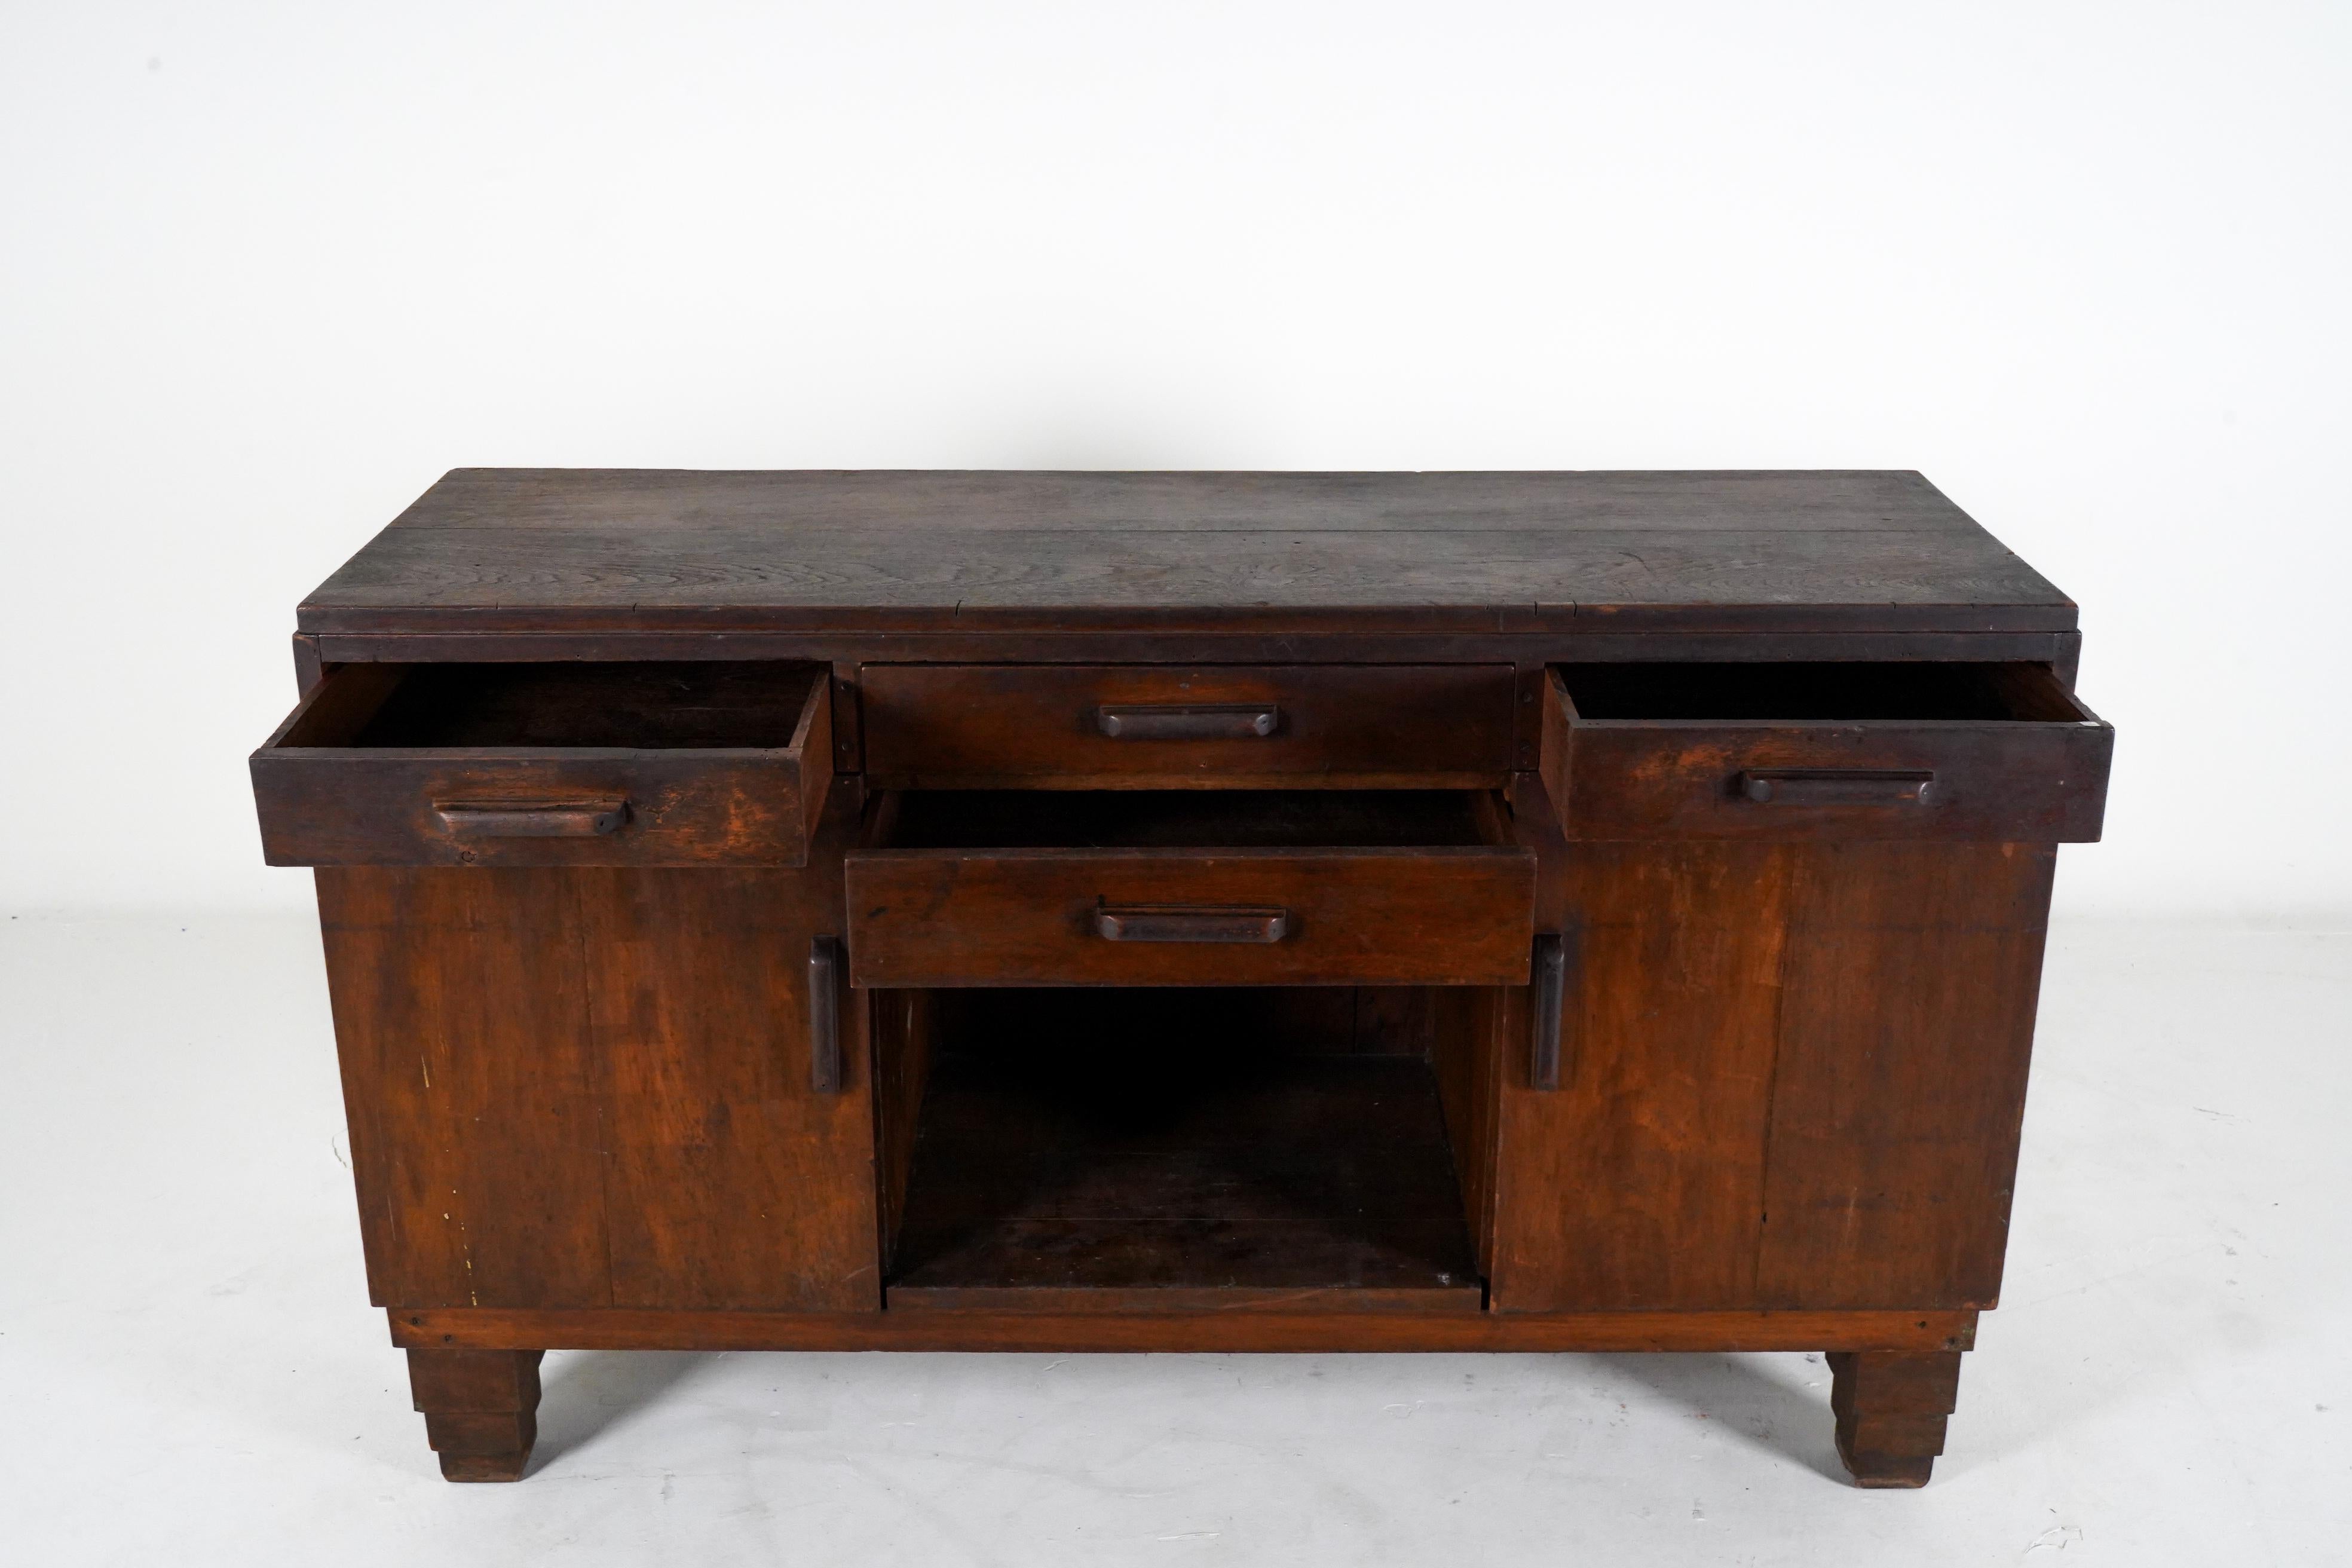 A British Colonial Teak Wood Shop Counter In Good Condition For Sale In Chicago, IL